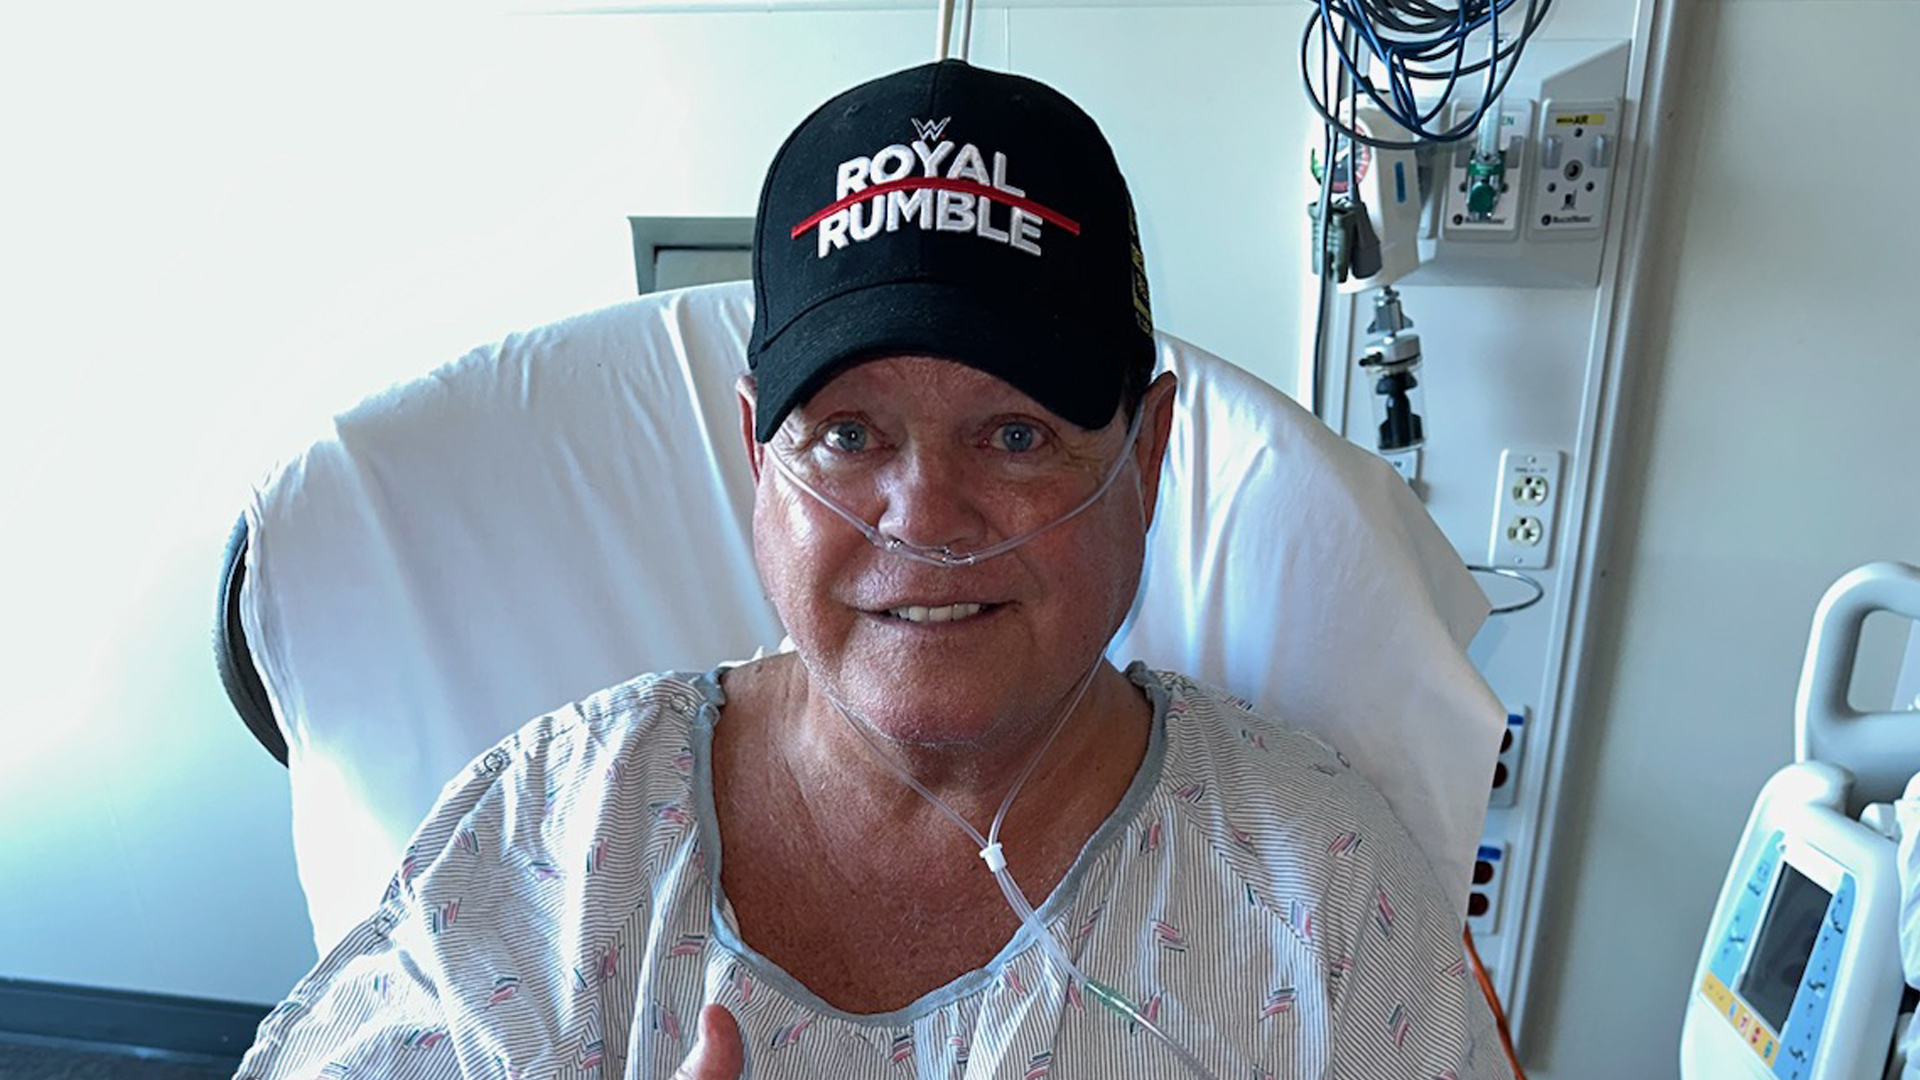  Jerry Lawler health updates — WWE star ‘The King’ seen for first time in hospital after suffering ‘massive stroke’ 